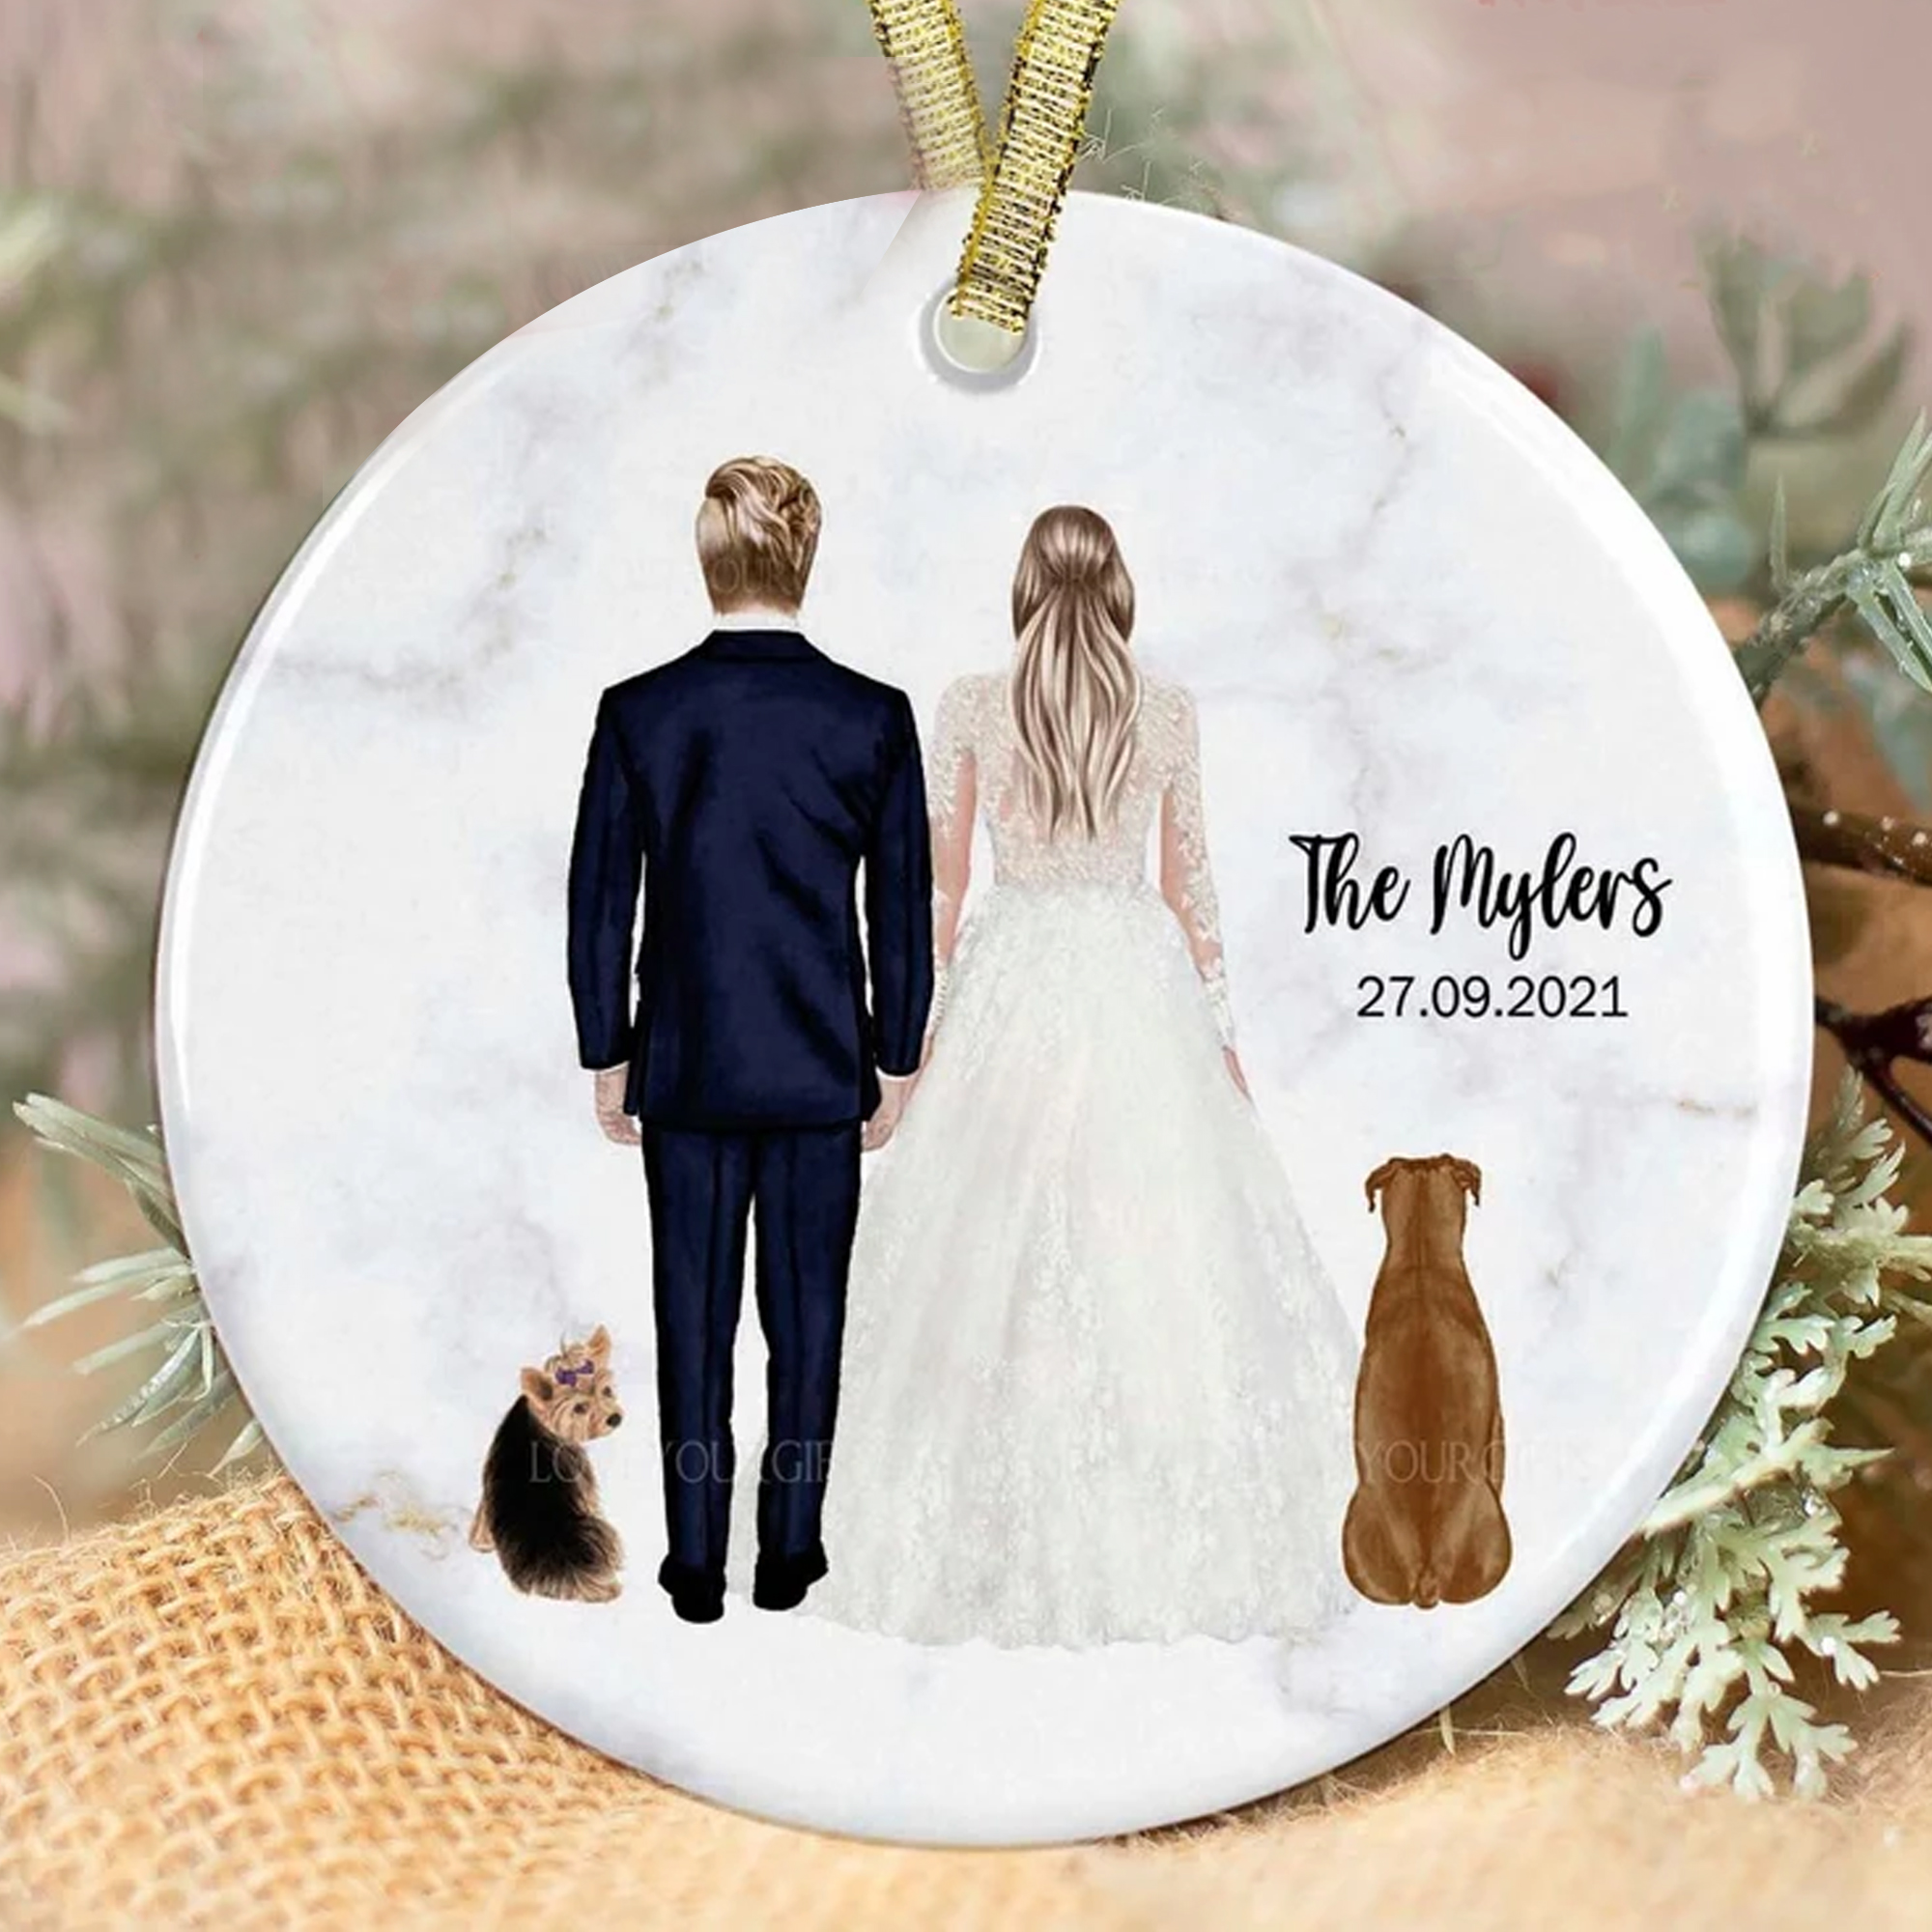 Personalized Mr And Mrs Wedding Ornament With Pets Just Married Ornament Newly Wed Mr Mrs First Christmas Ornament Pet Ornament